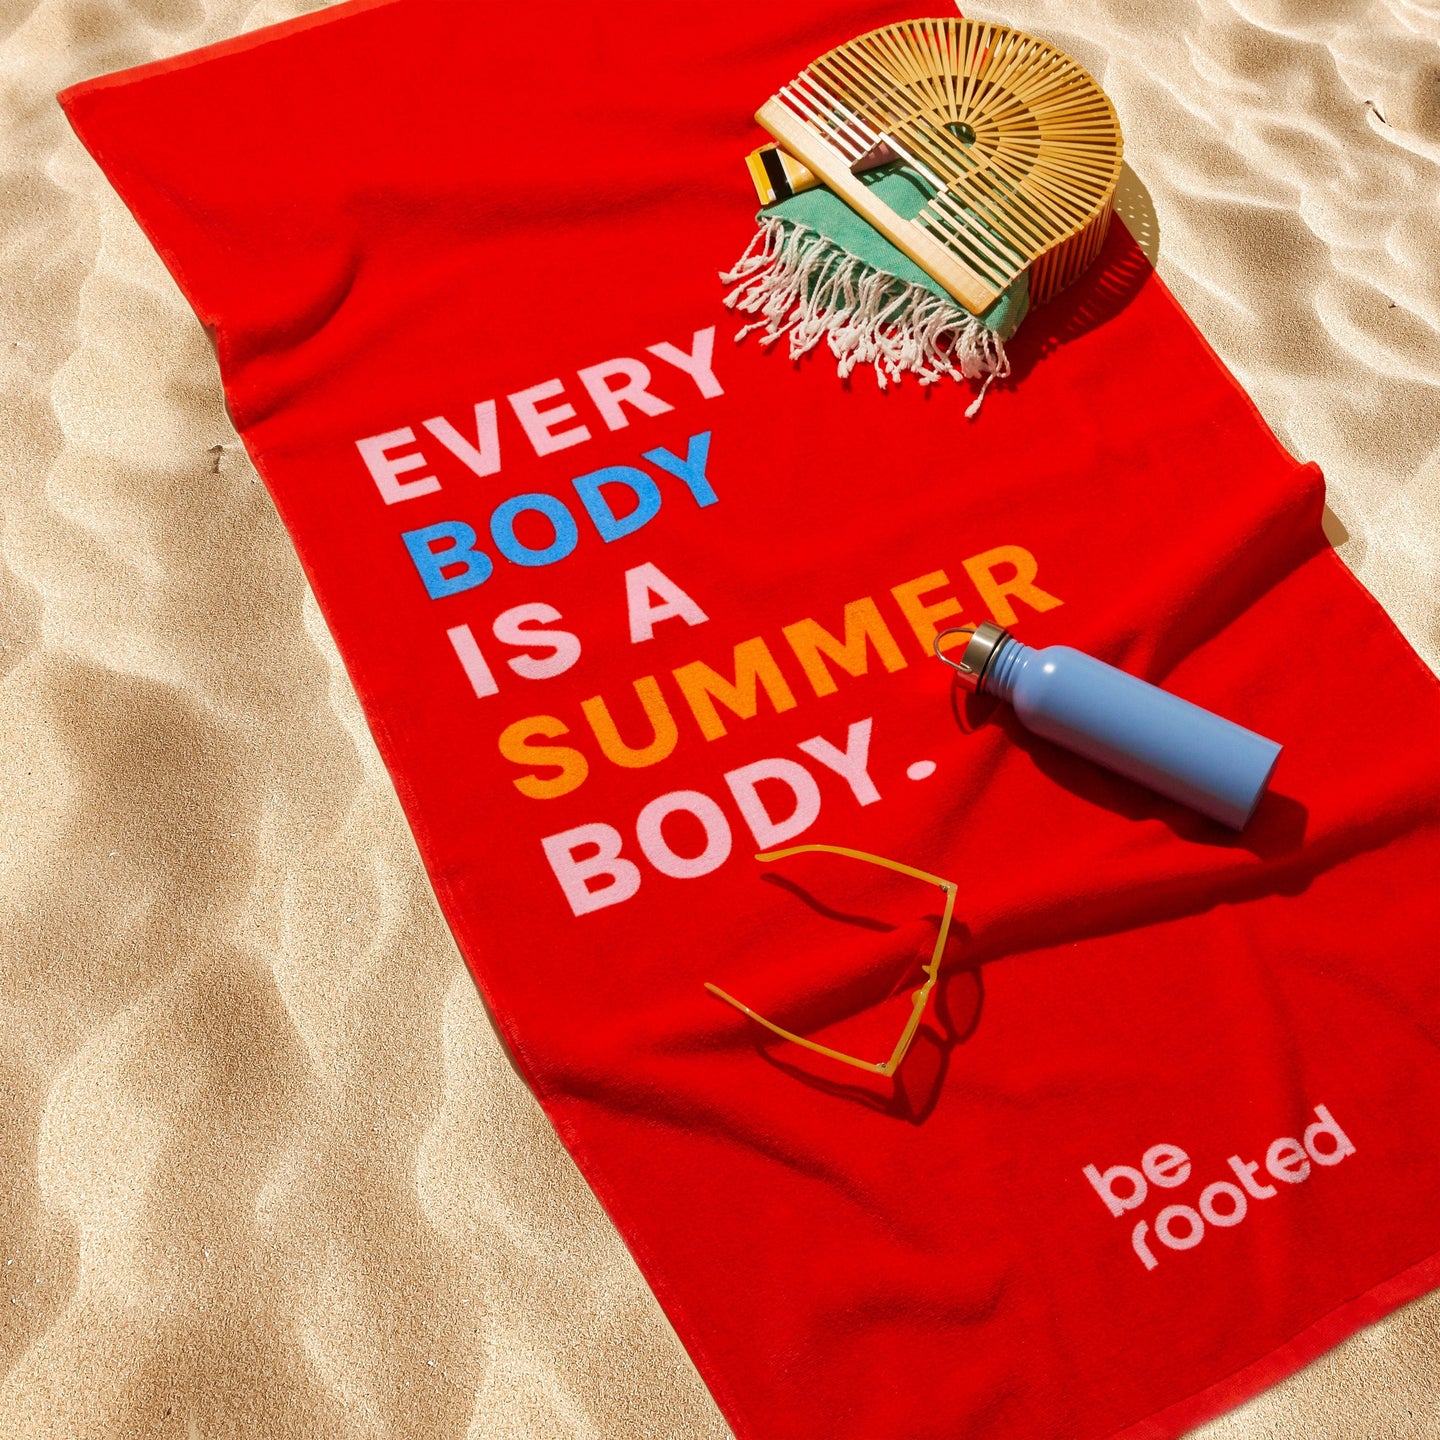 Everybody is a summer body towel